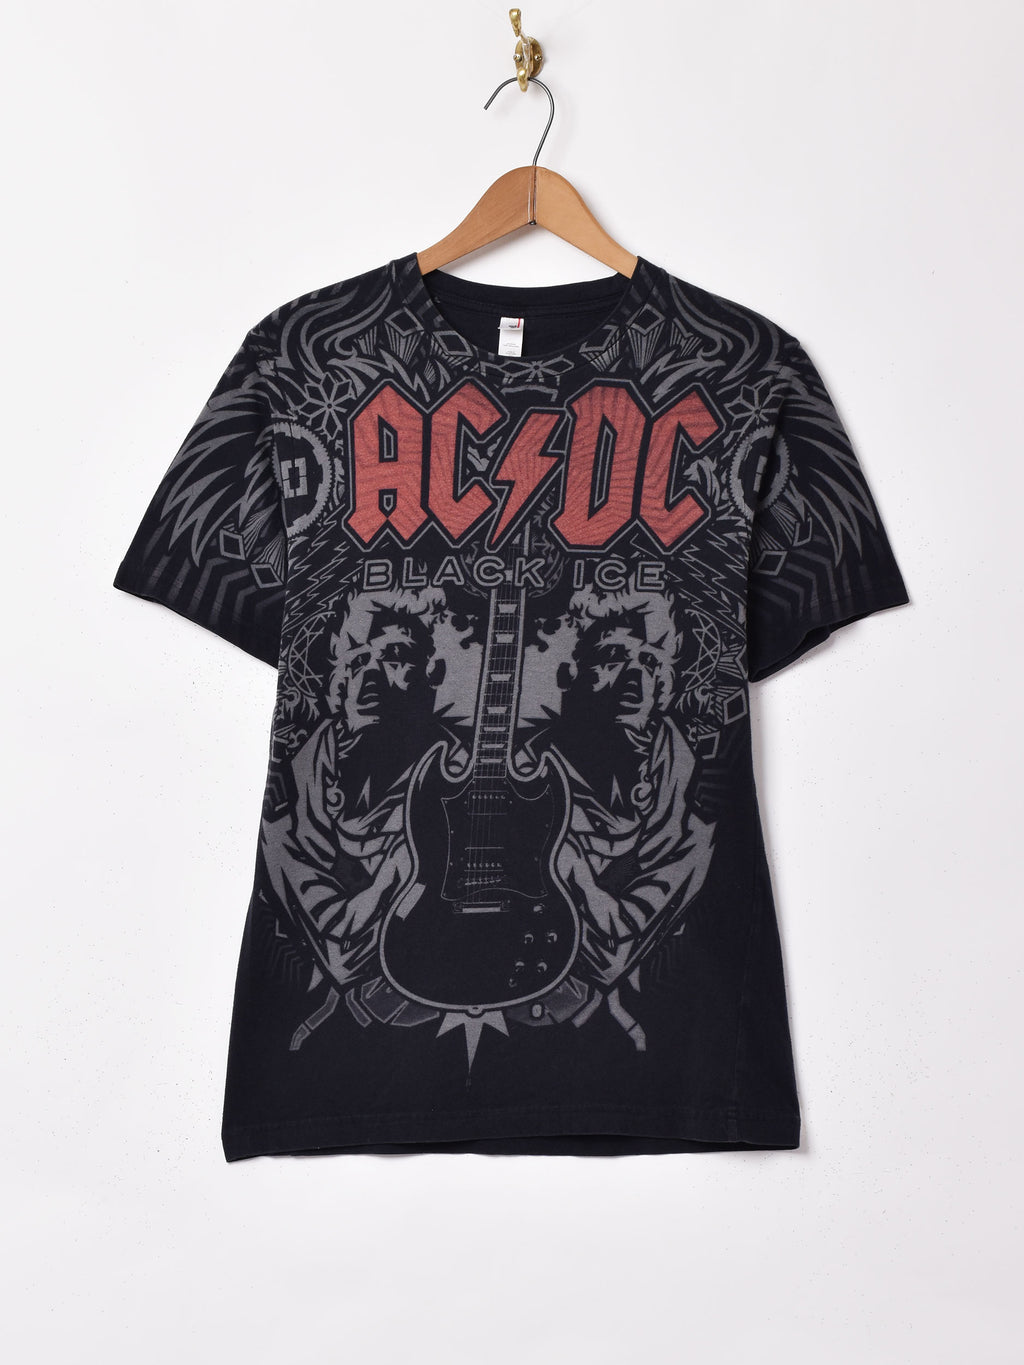 ACDC バンドTシャツ – 古着屋Top of the Hillのネット通販サイト